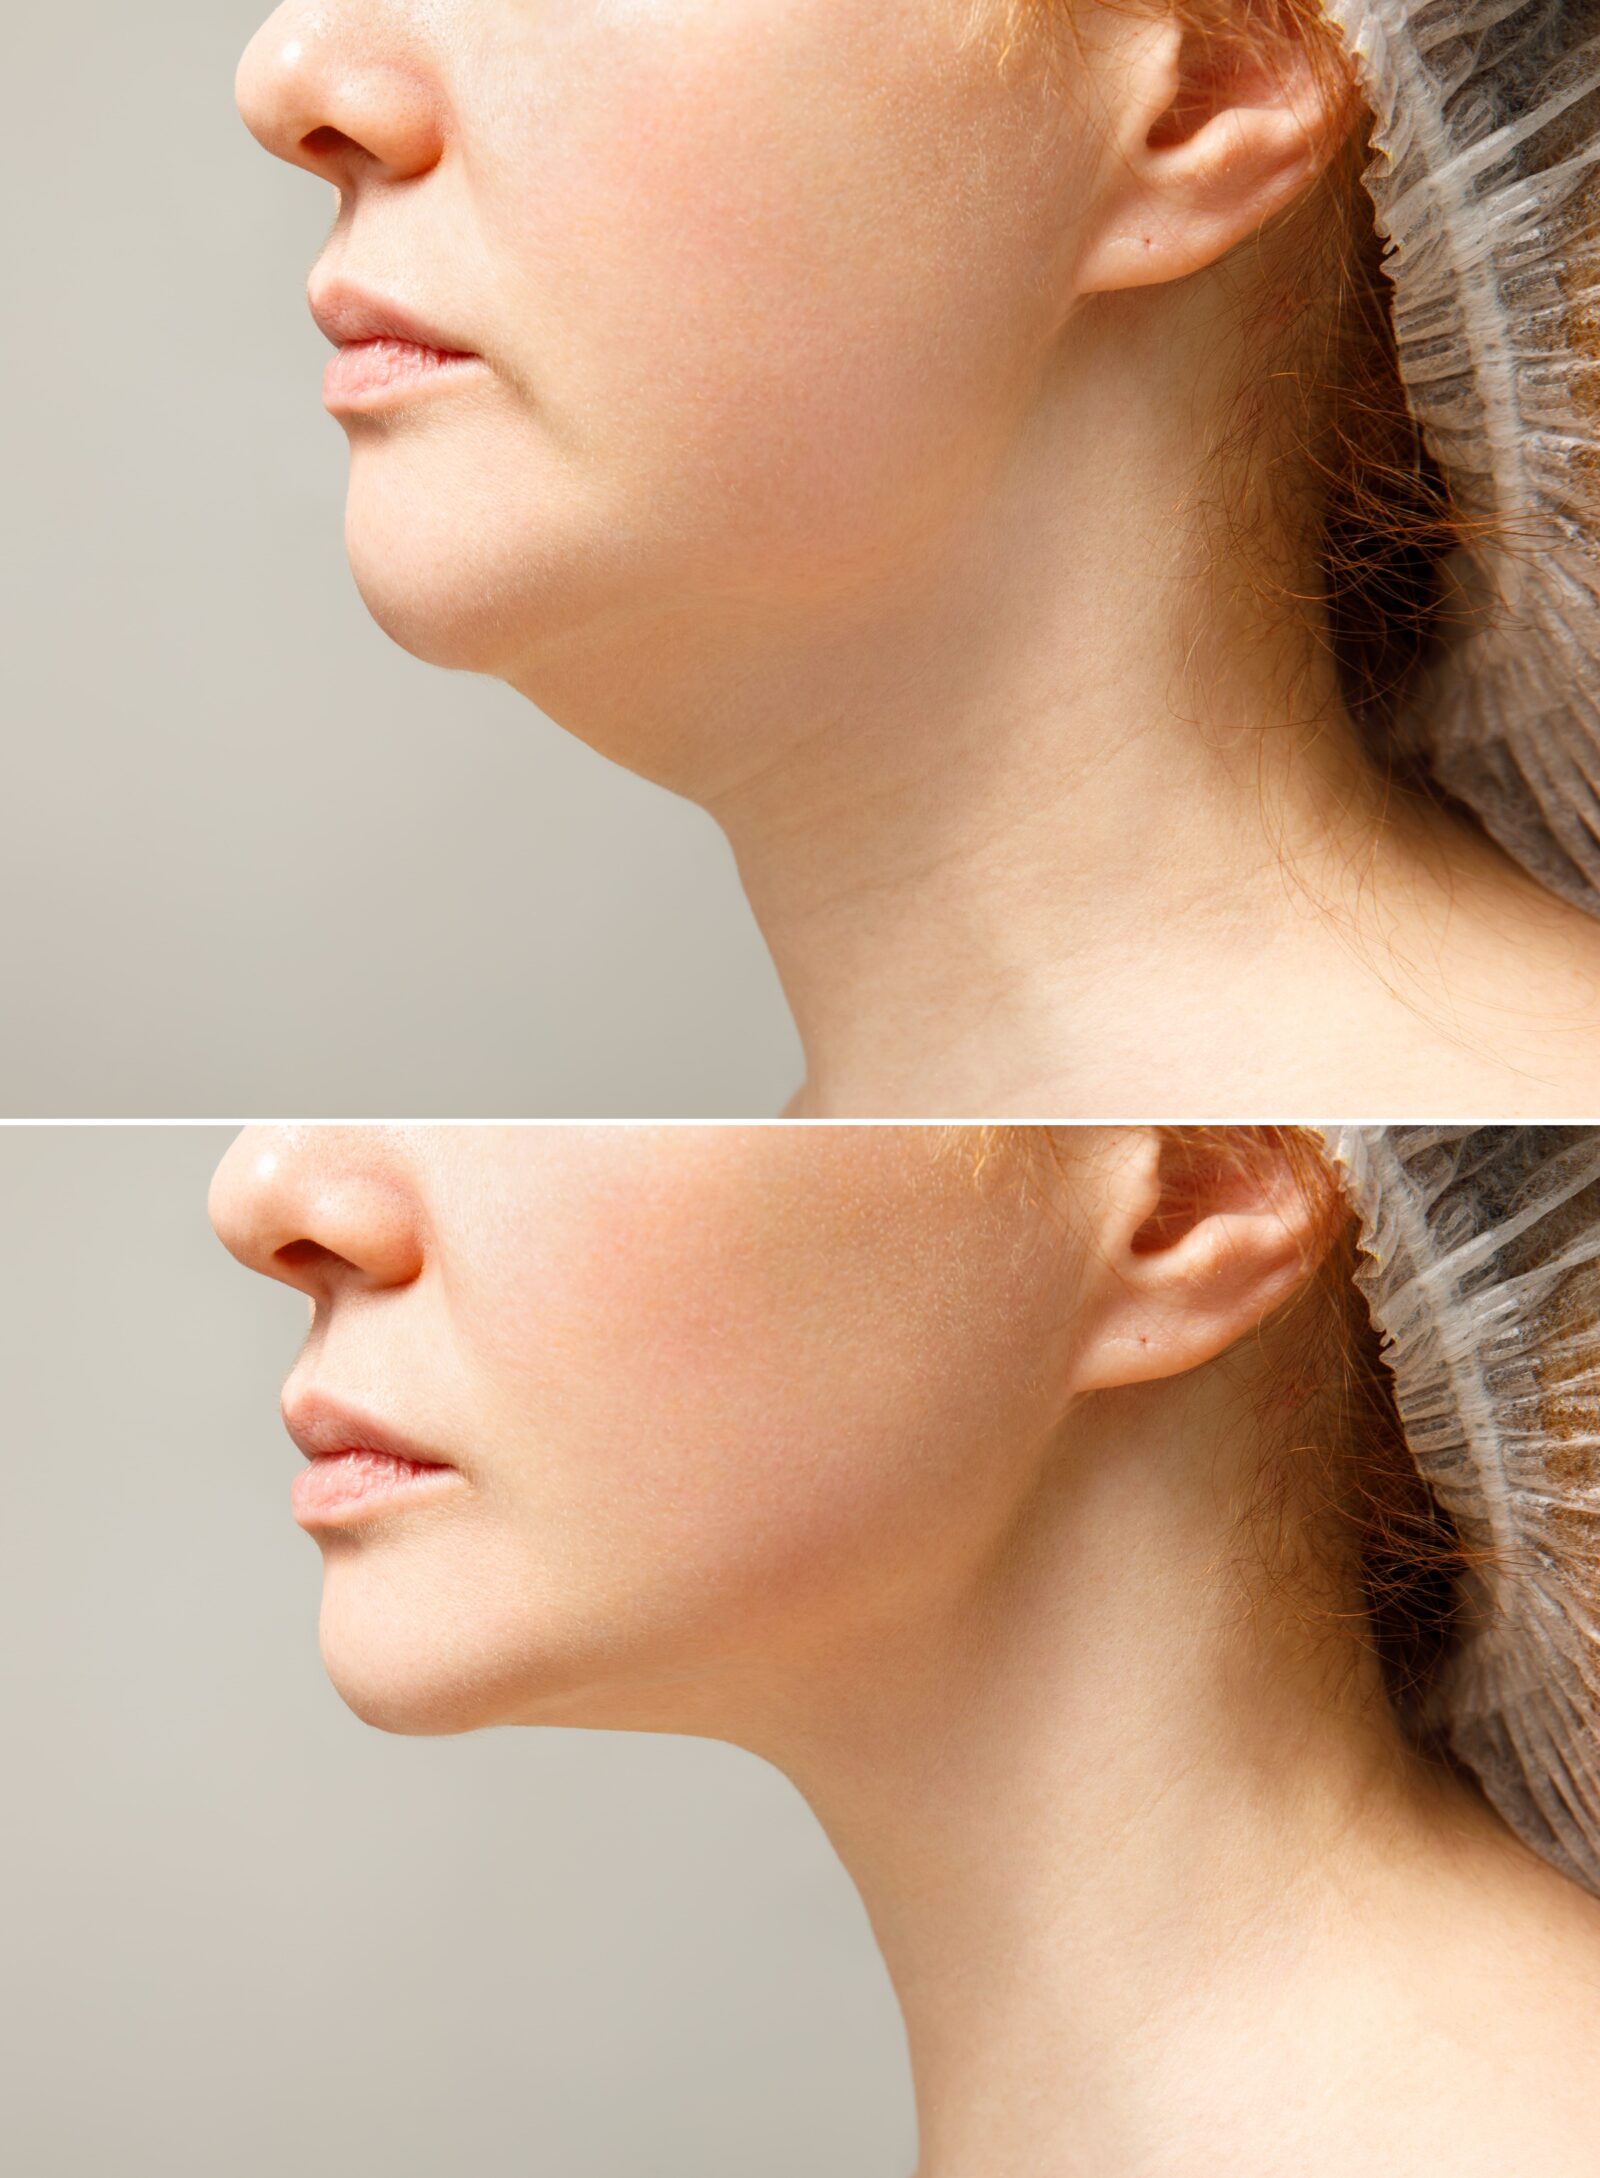 Female double chin before and after correction. Correction of the chin shape liposuction of the neck. The result of the procedure in the clinic of aesthetic medicine.